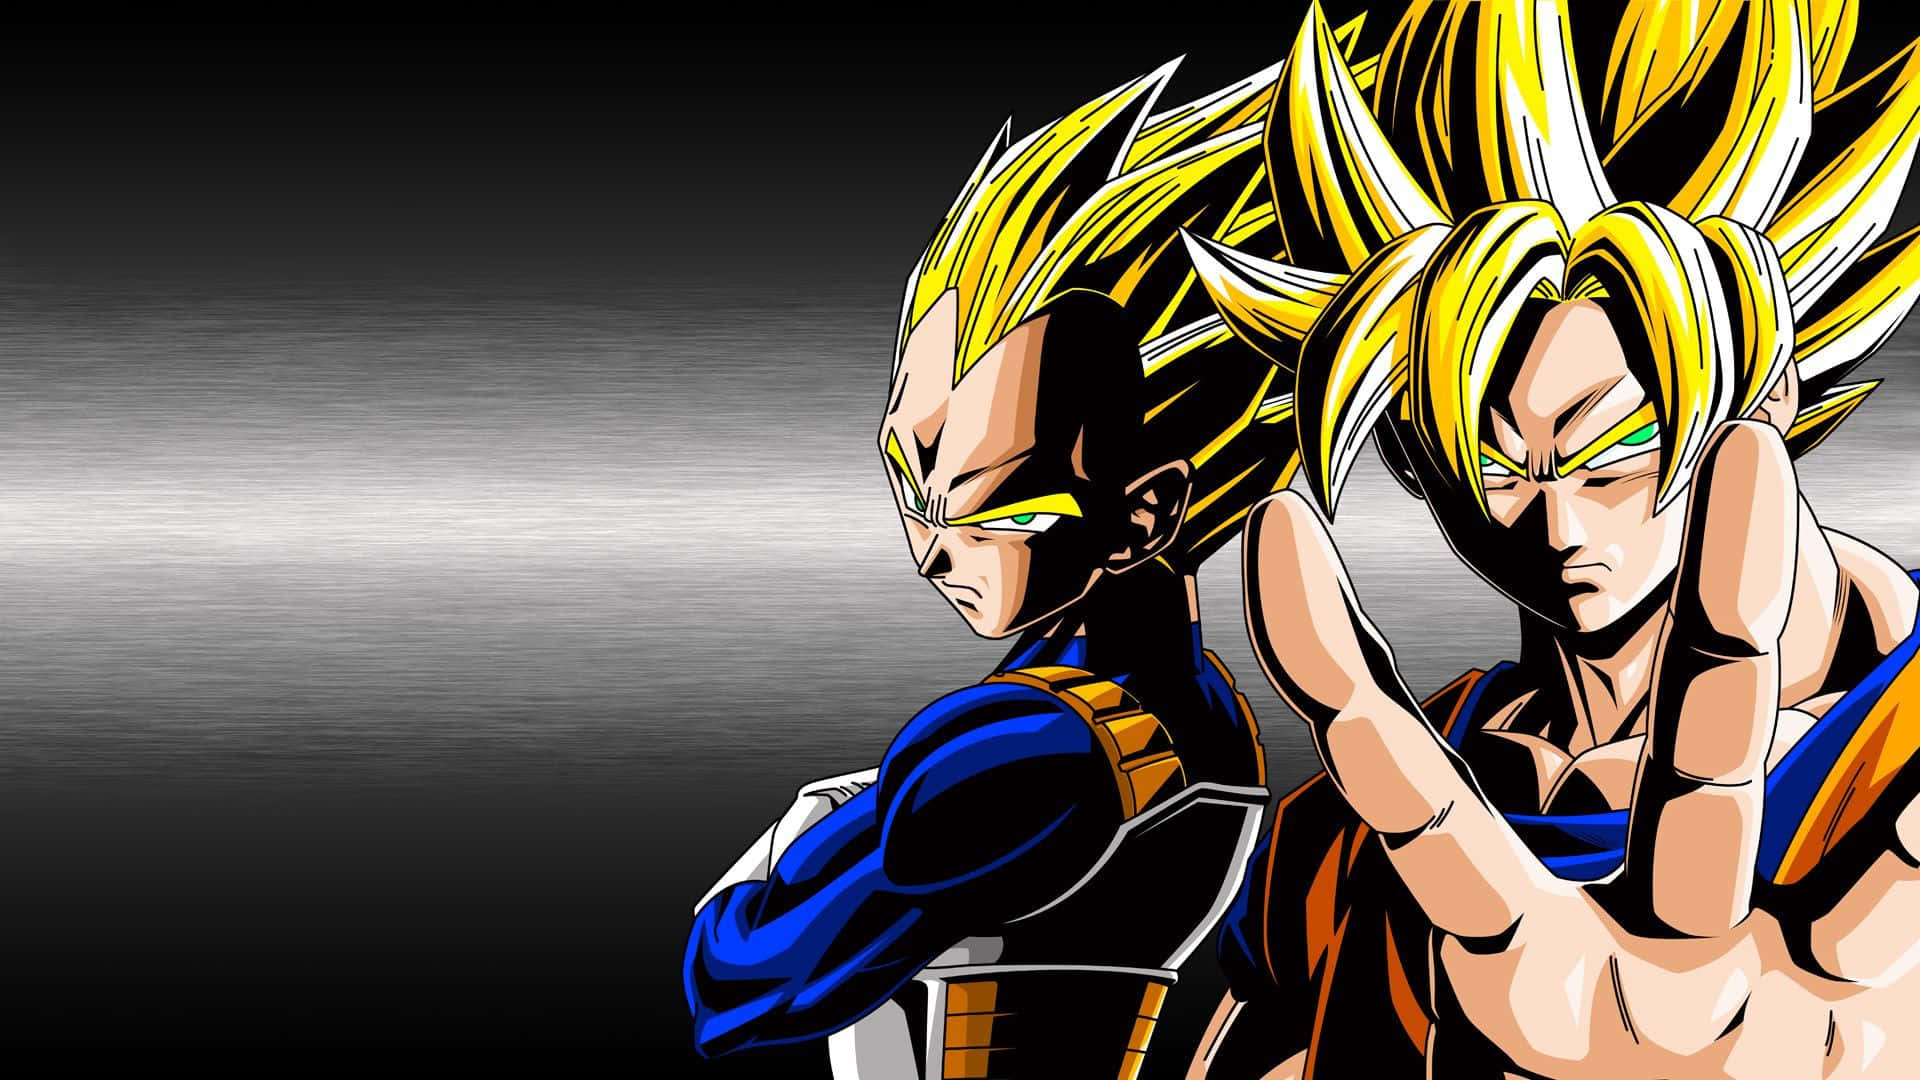 Goku and Vegeta join forces to defeat Moro